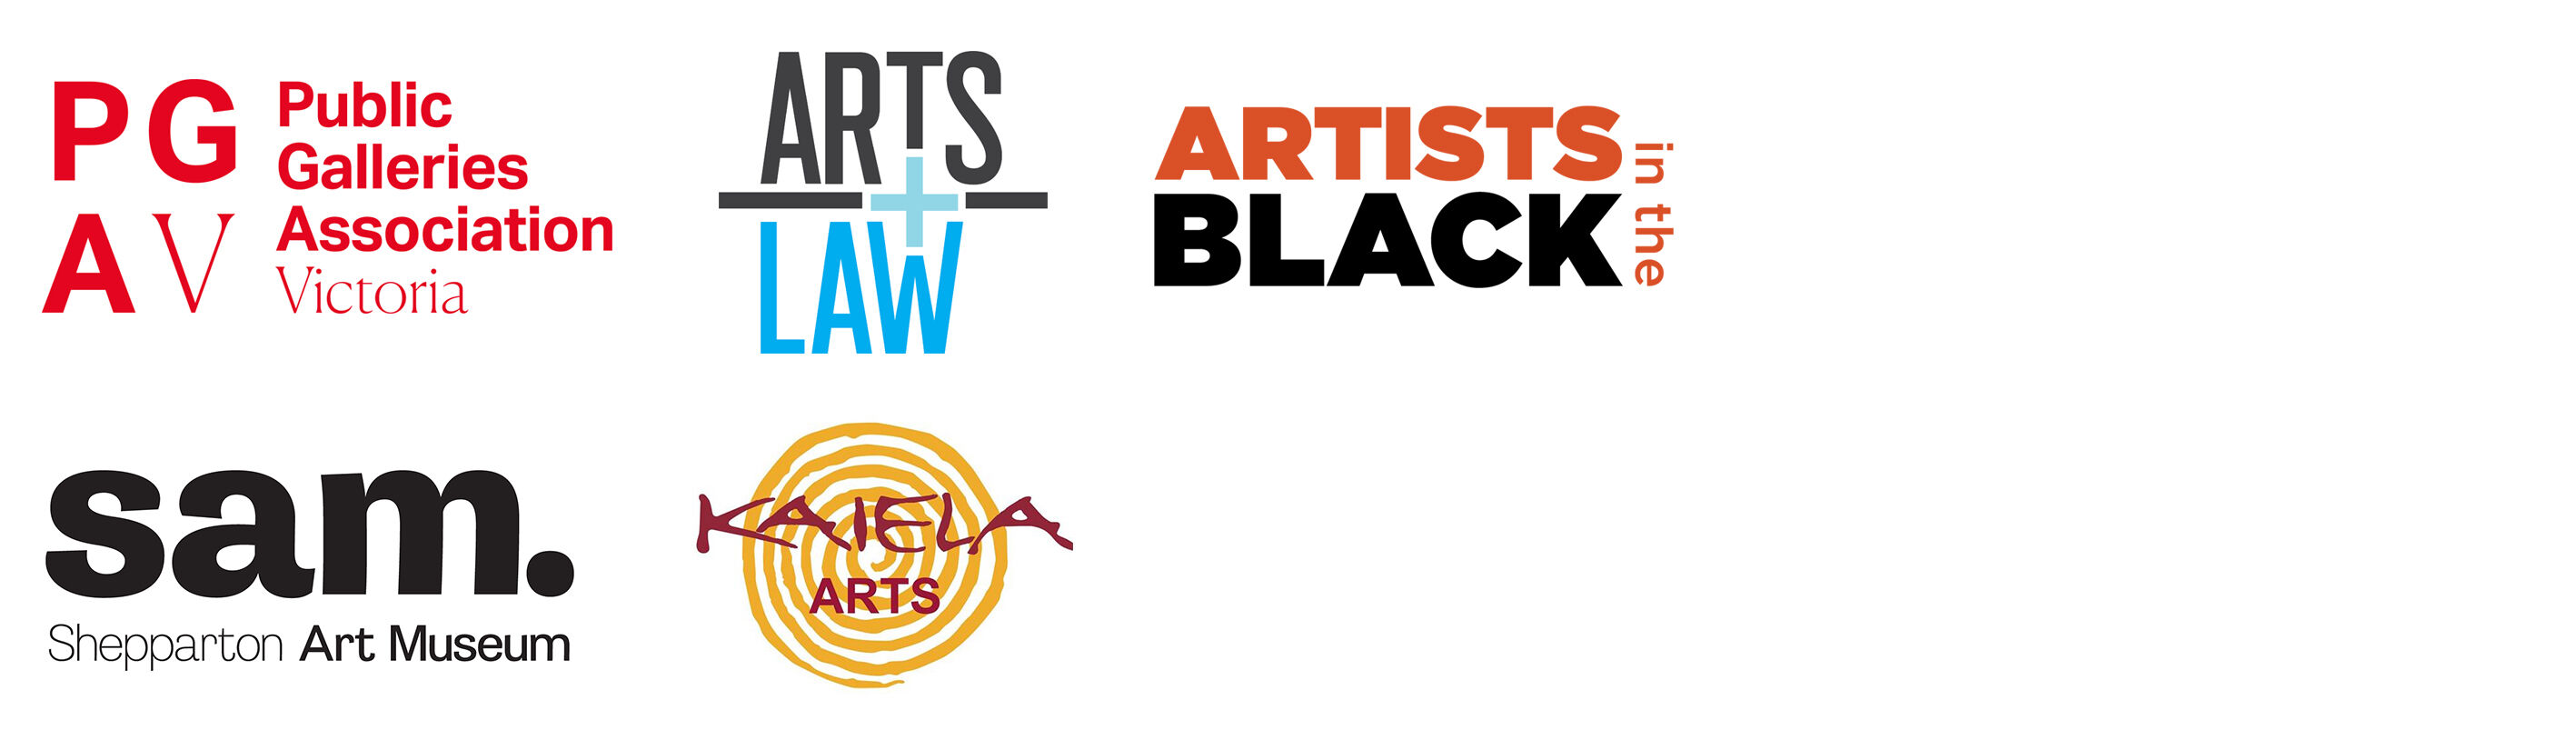 Artists in the Black at SAM